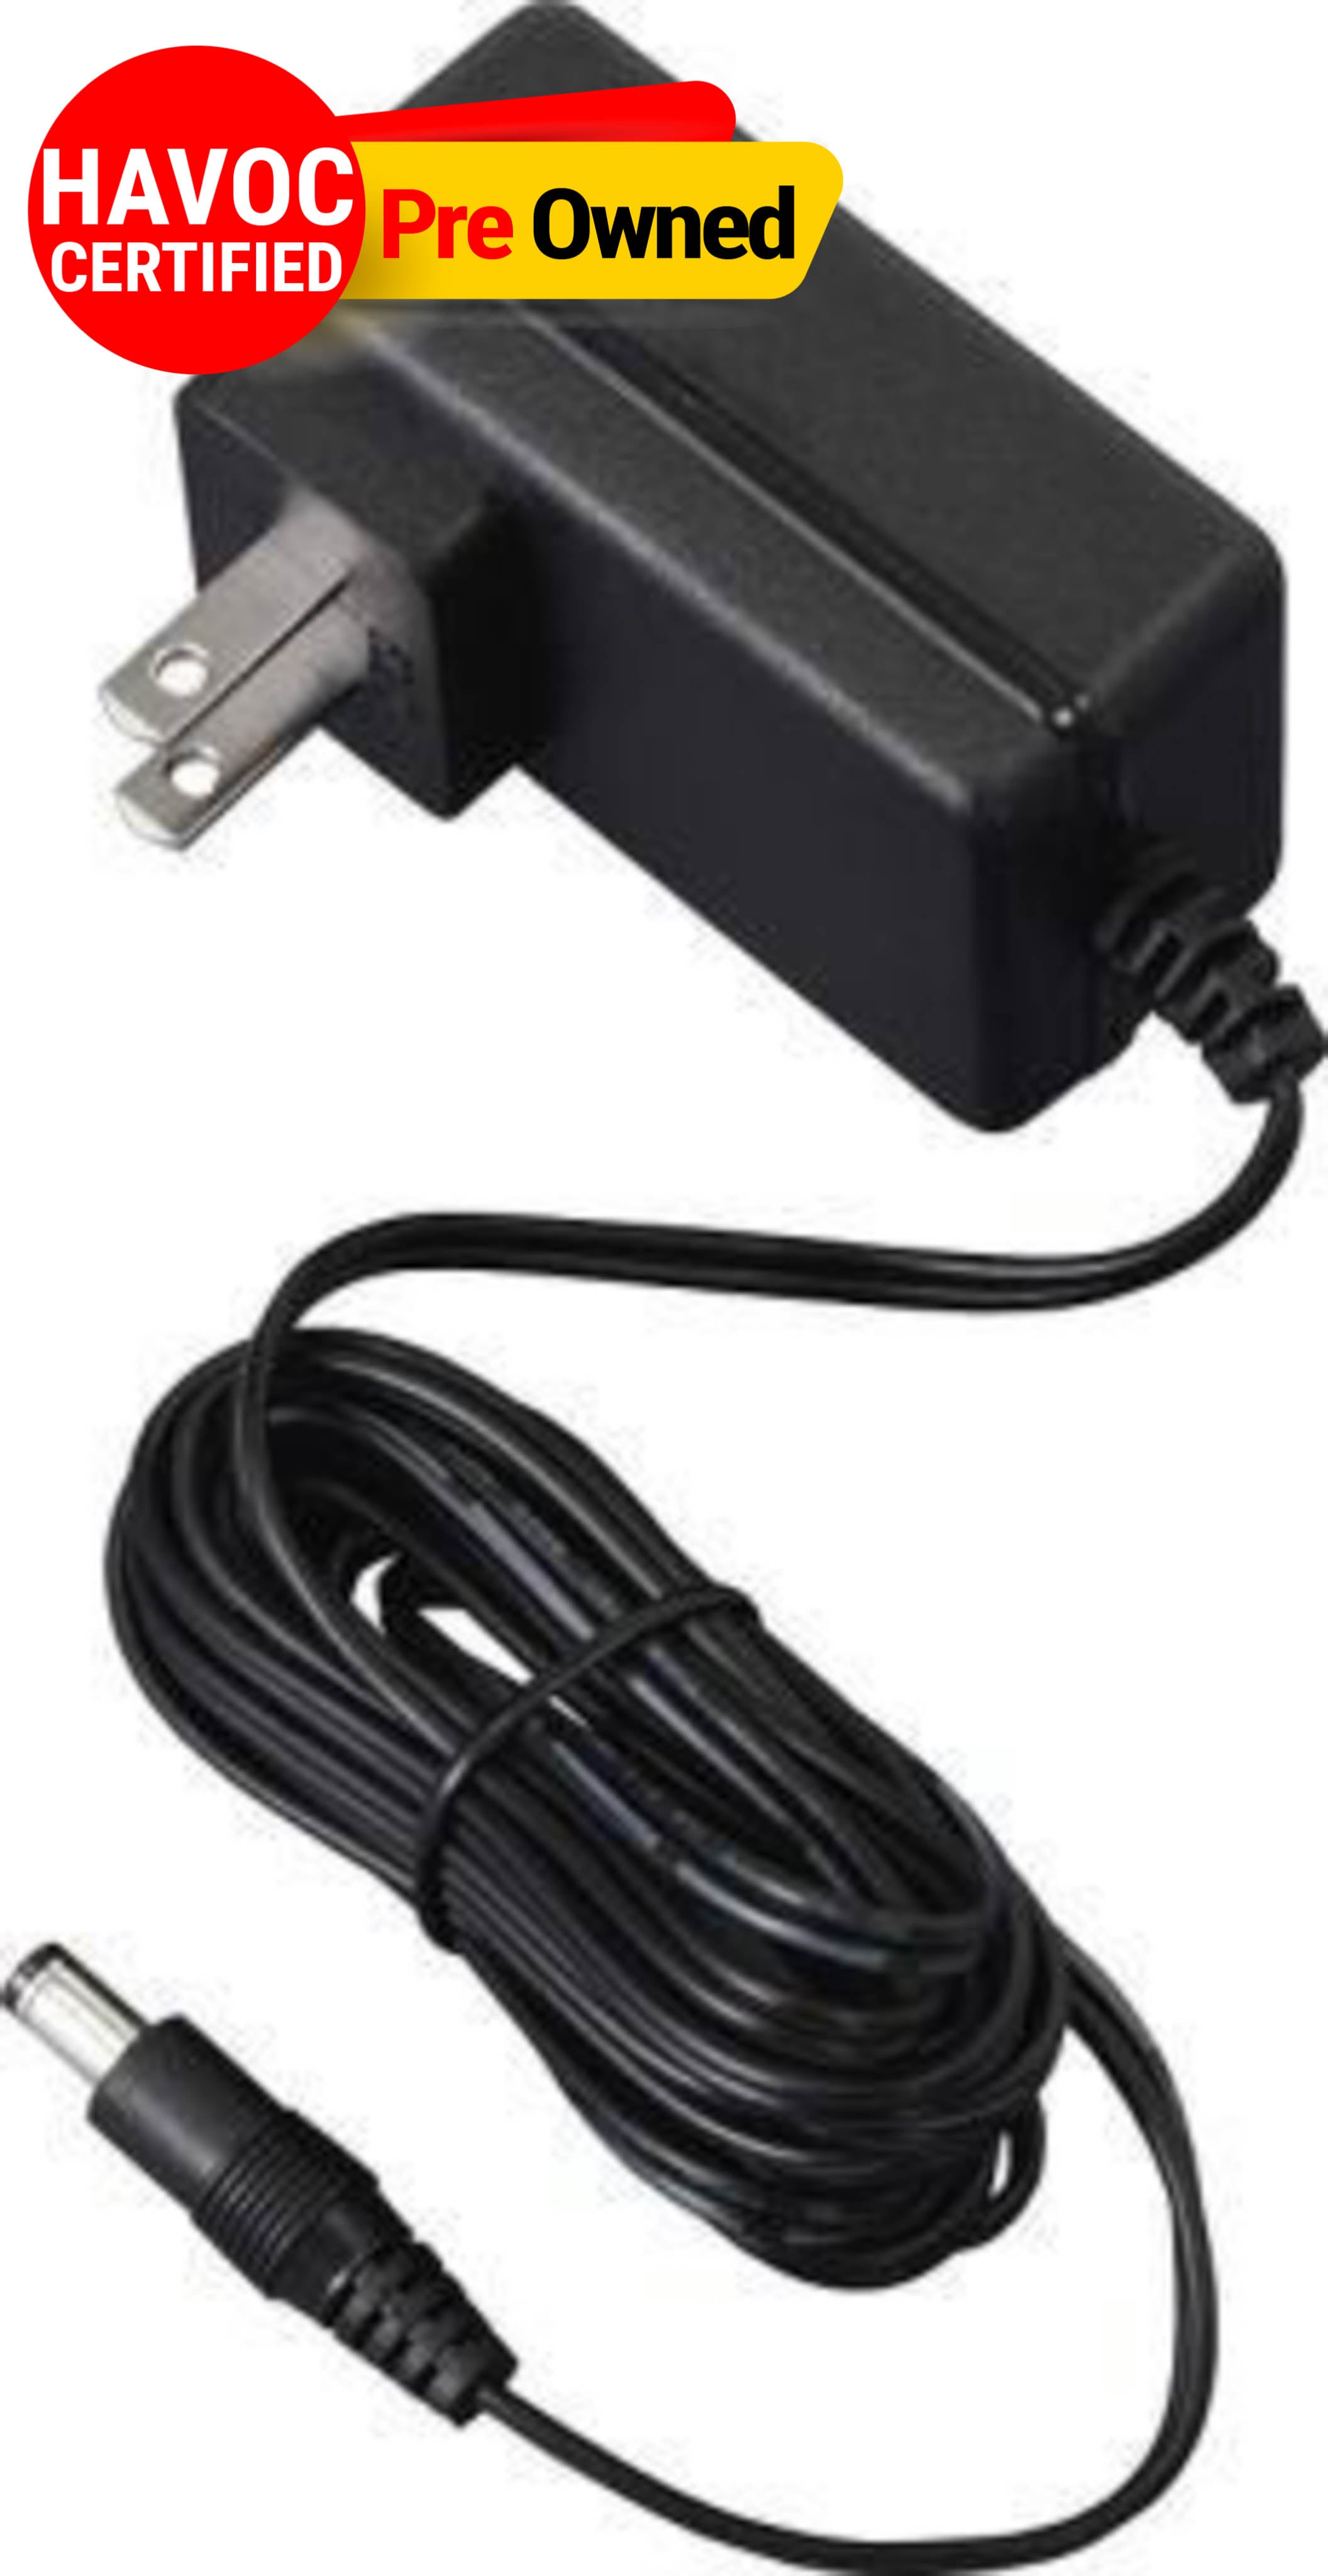 POWER ADAPTOR(QUALITY PRE OWNED)